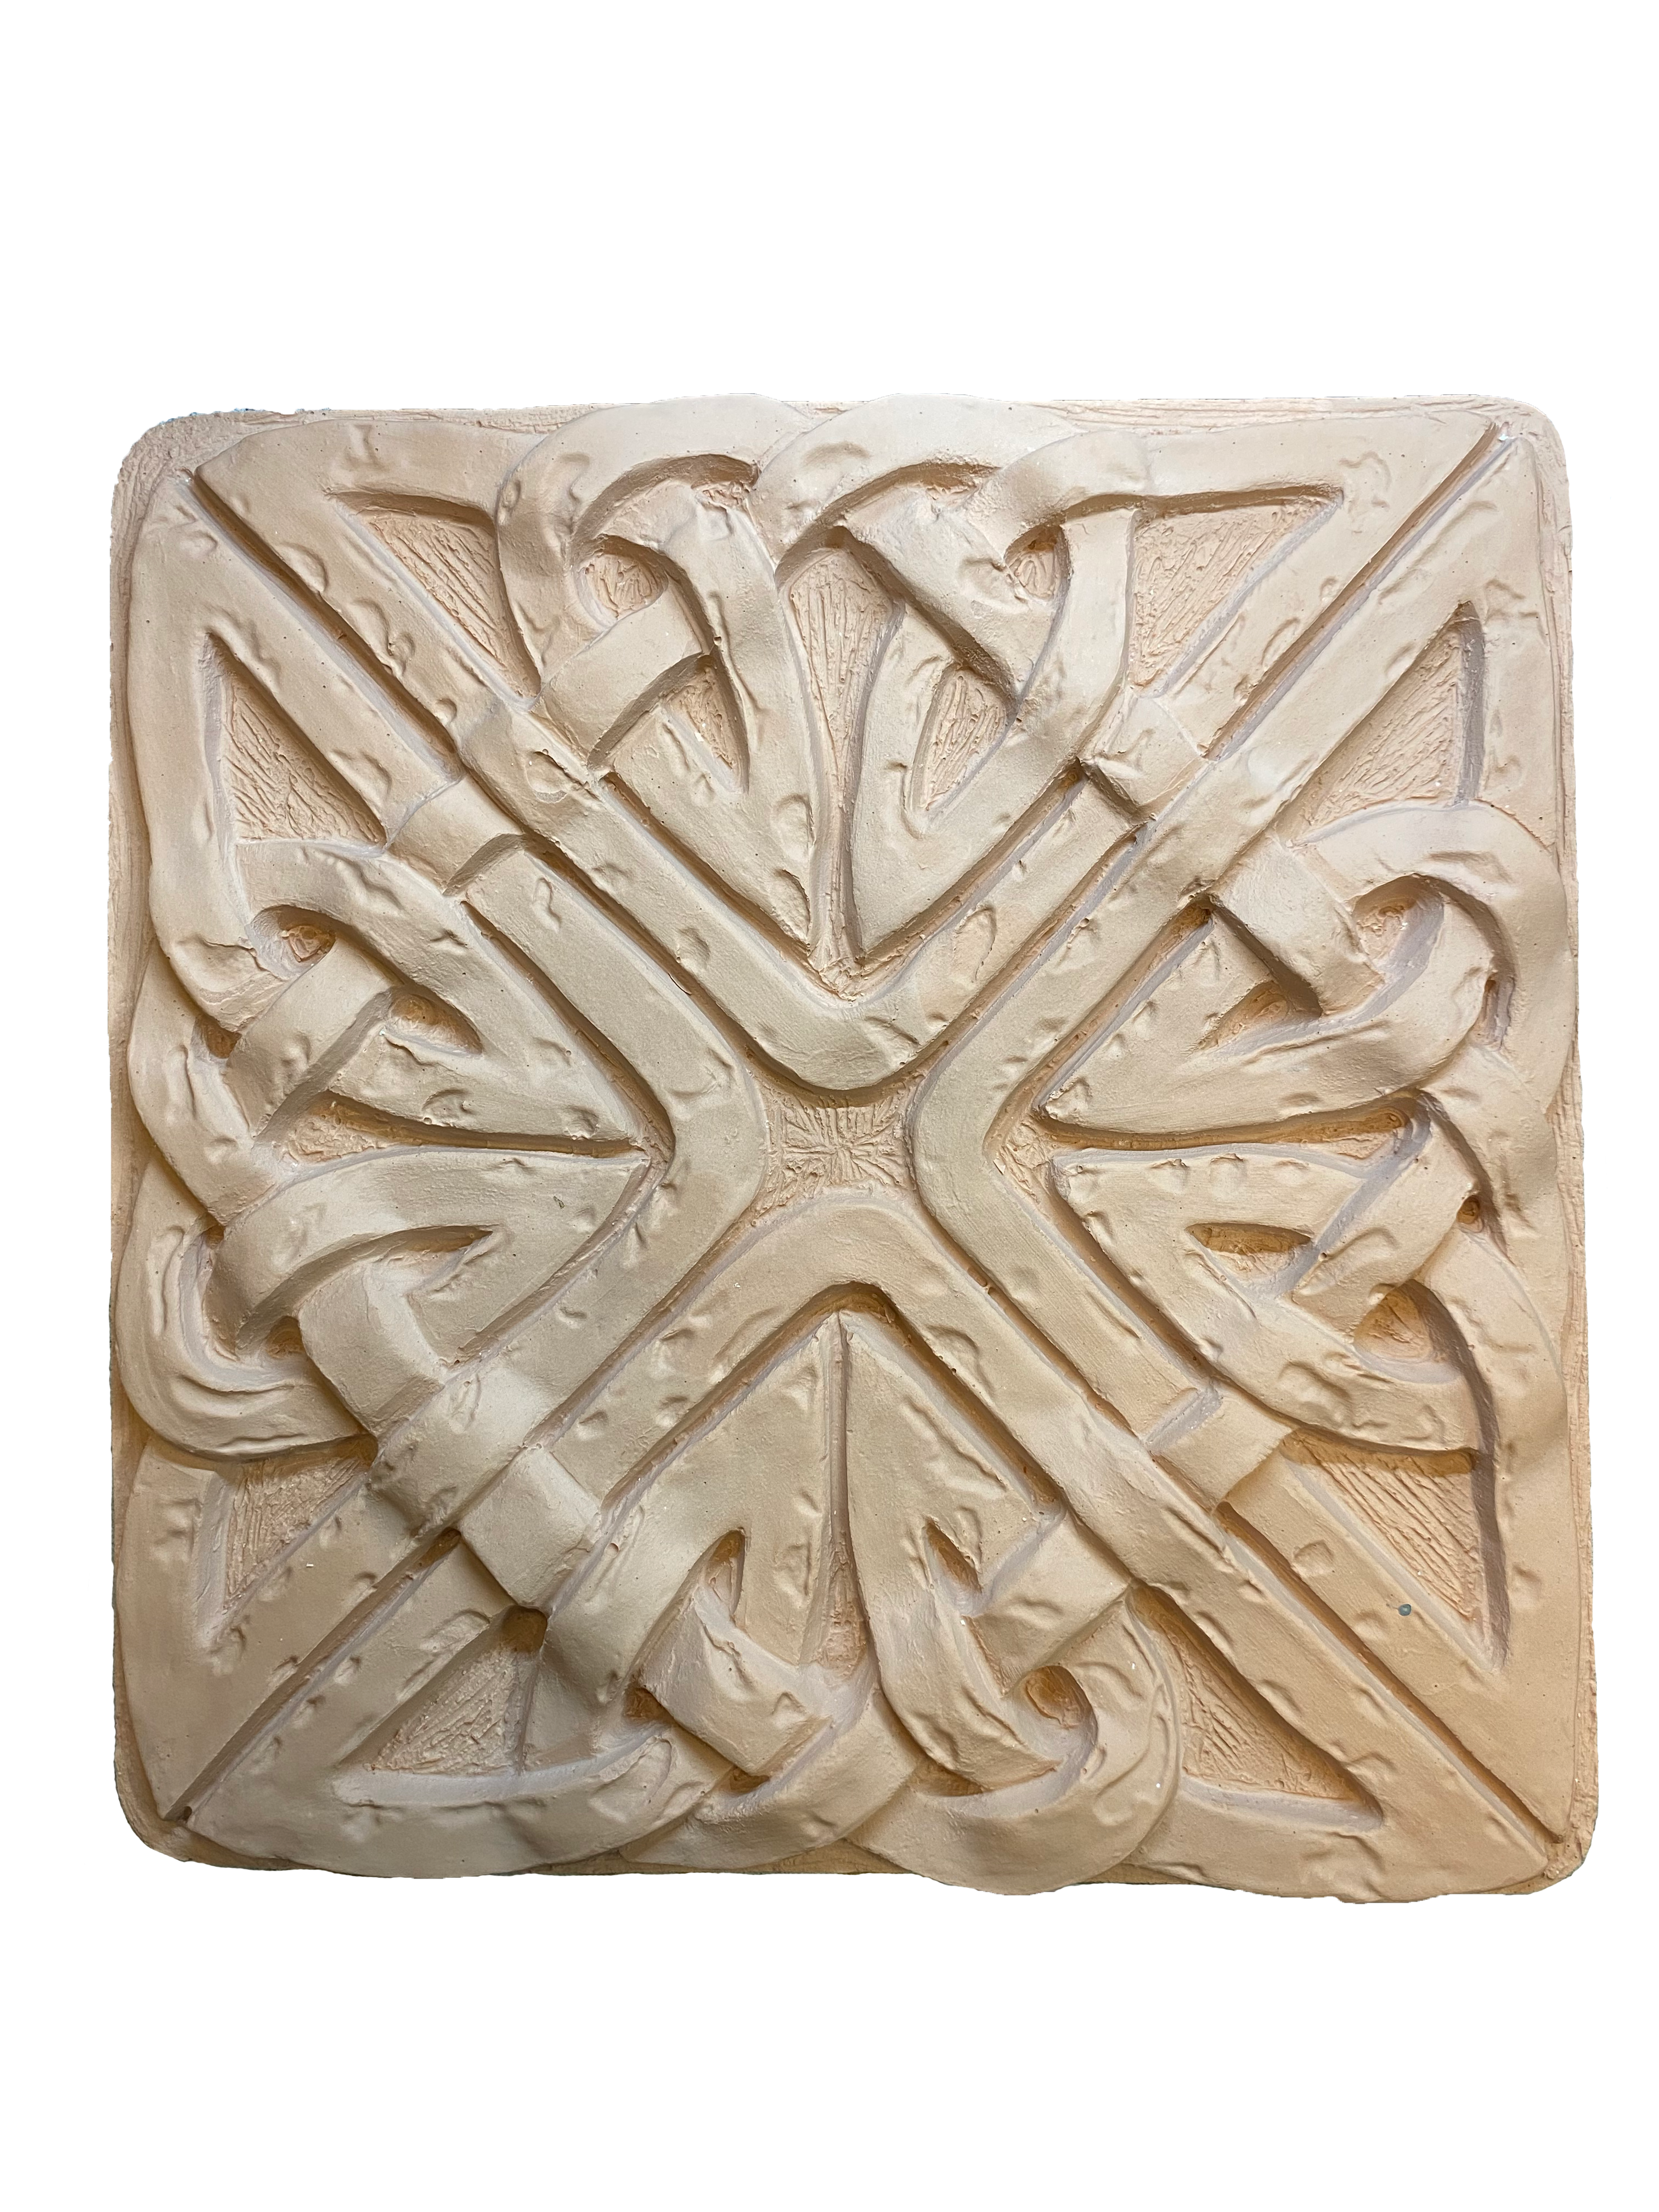 Celtic knot stepping stone plastic garden casting reusable mould 